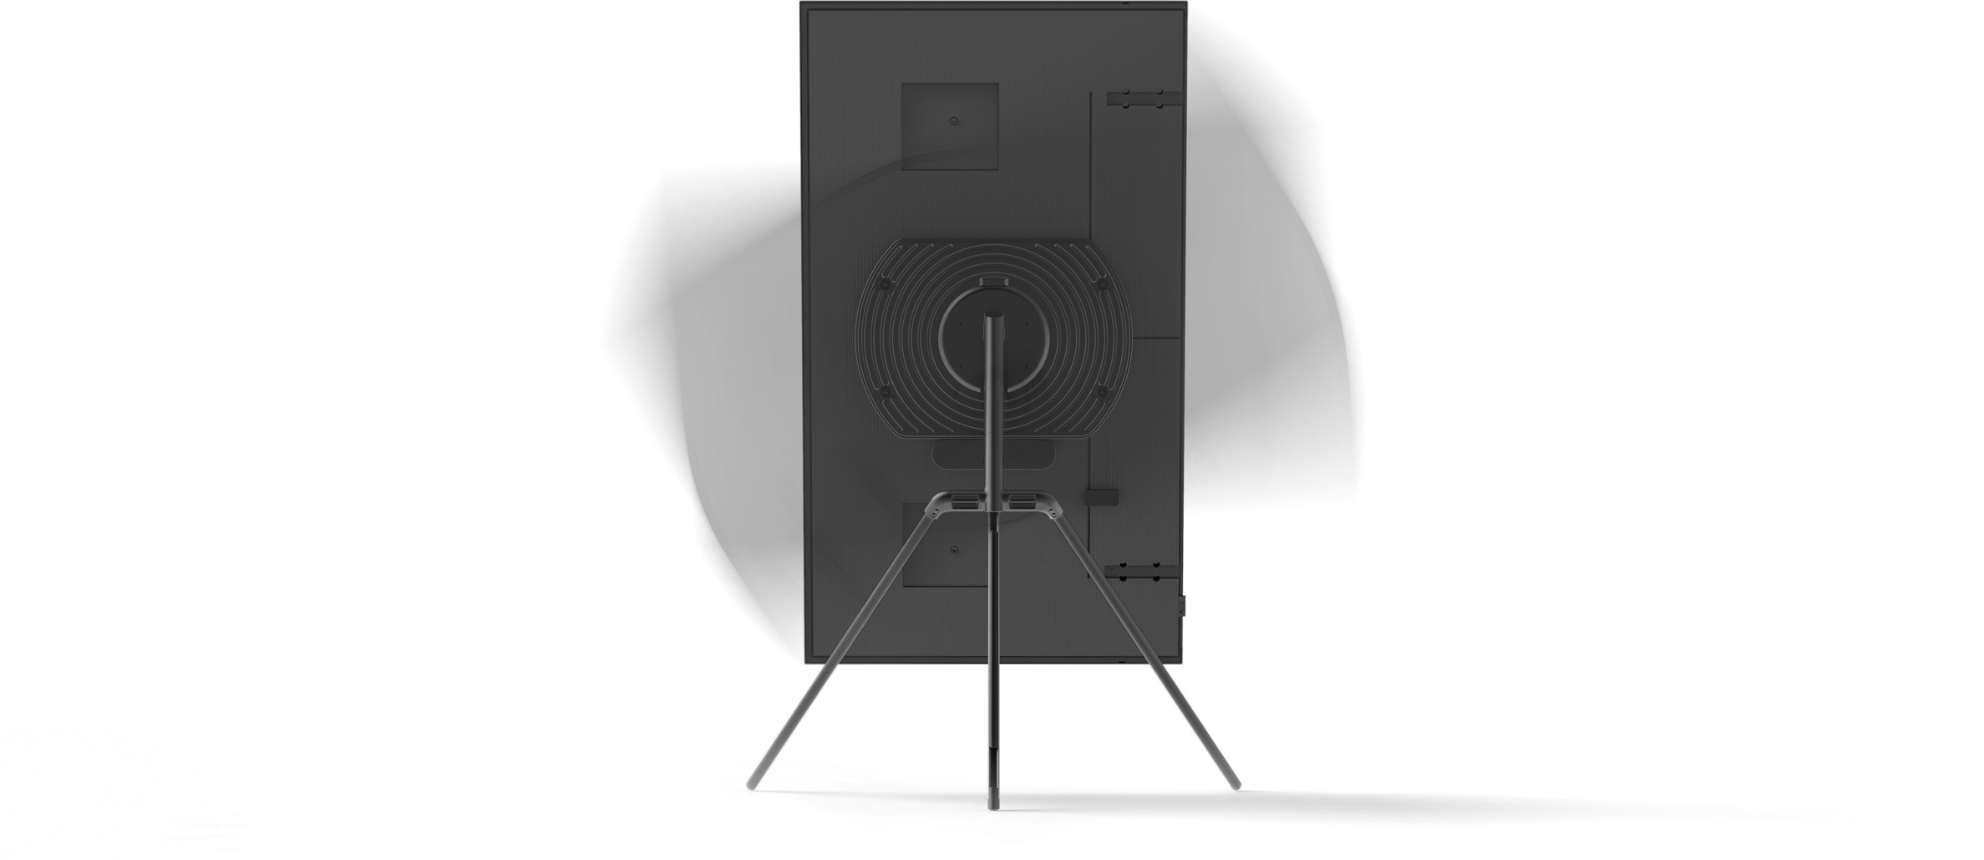 This image shows the rear view of a TV rotated vertically using the Samsung the Auto Rotation Accessory.
